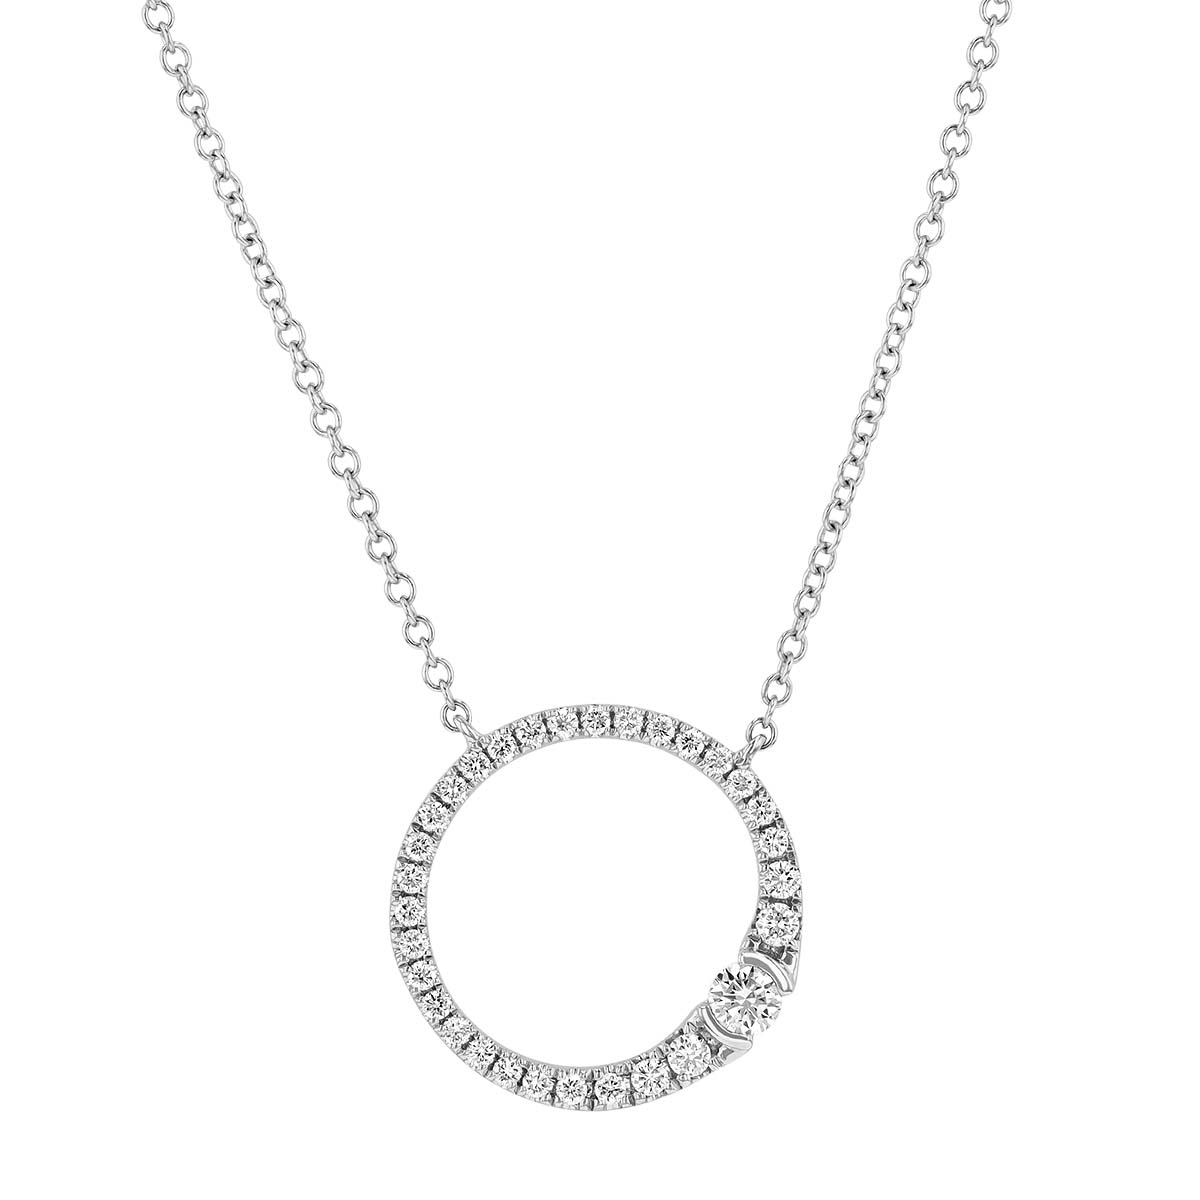 Diamond Graduated Open Circle Necklace in White Gold, 18